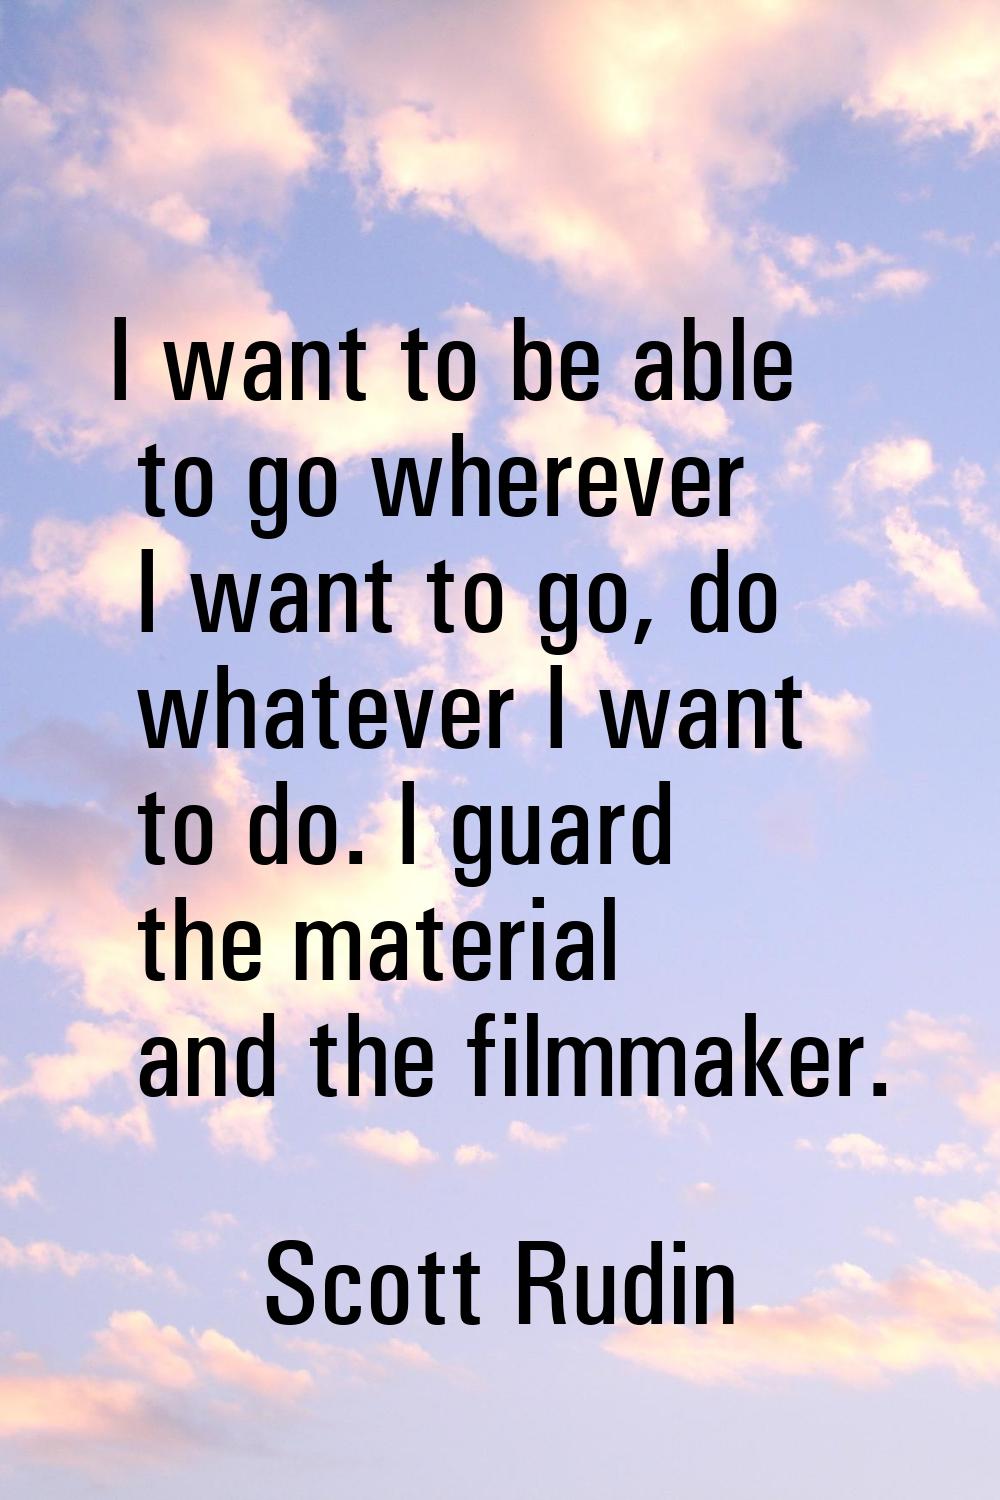 I want to be able to go wherever I want to go, do whatever I want to do. I guard the material and t